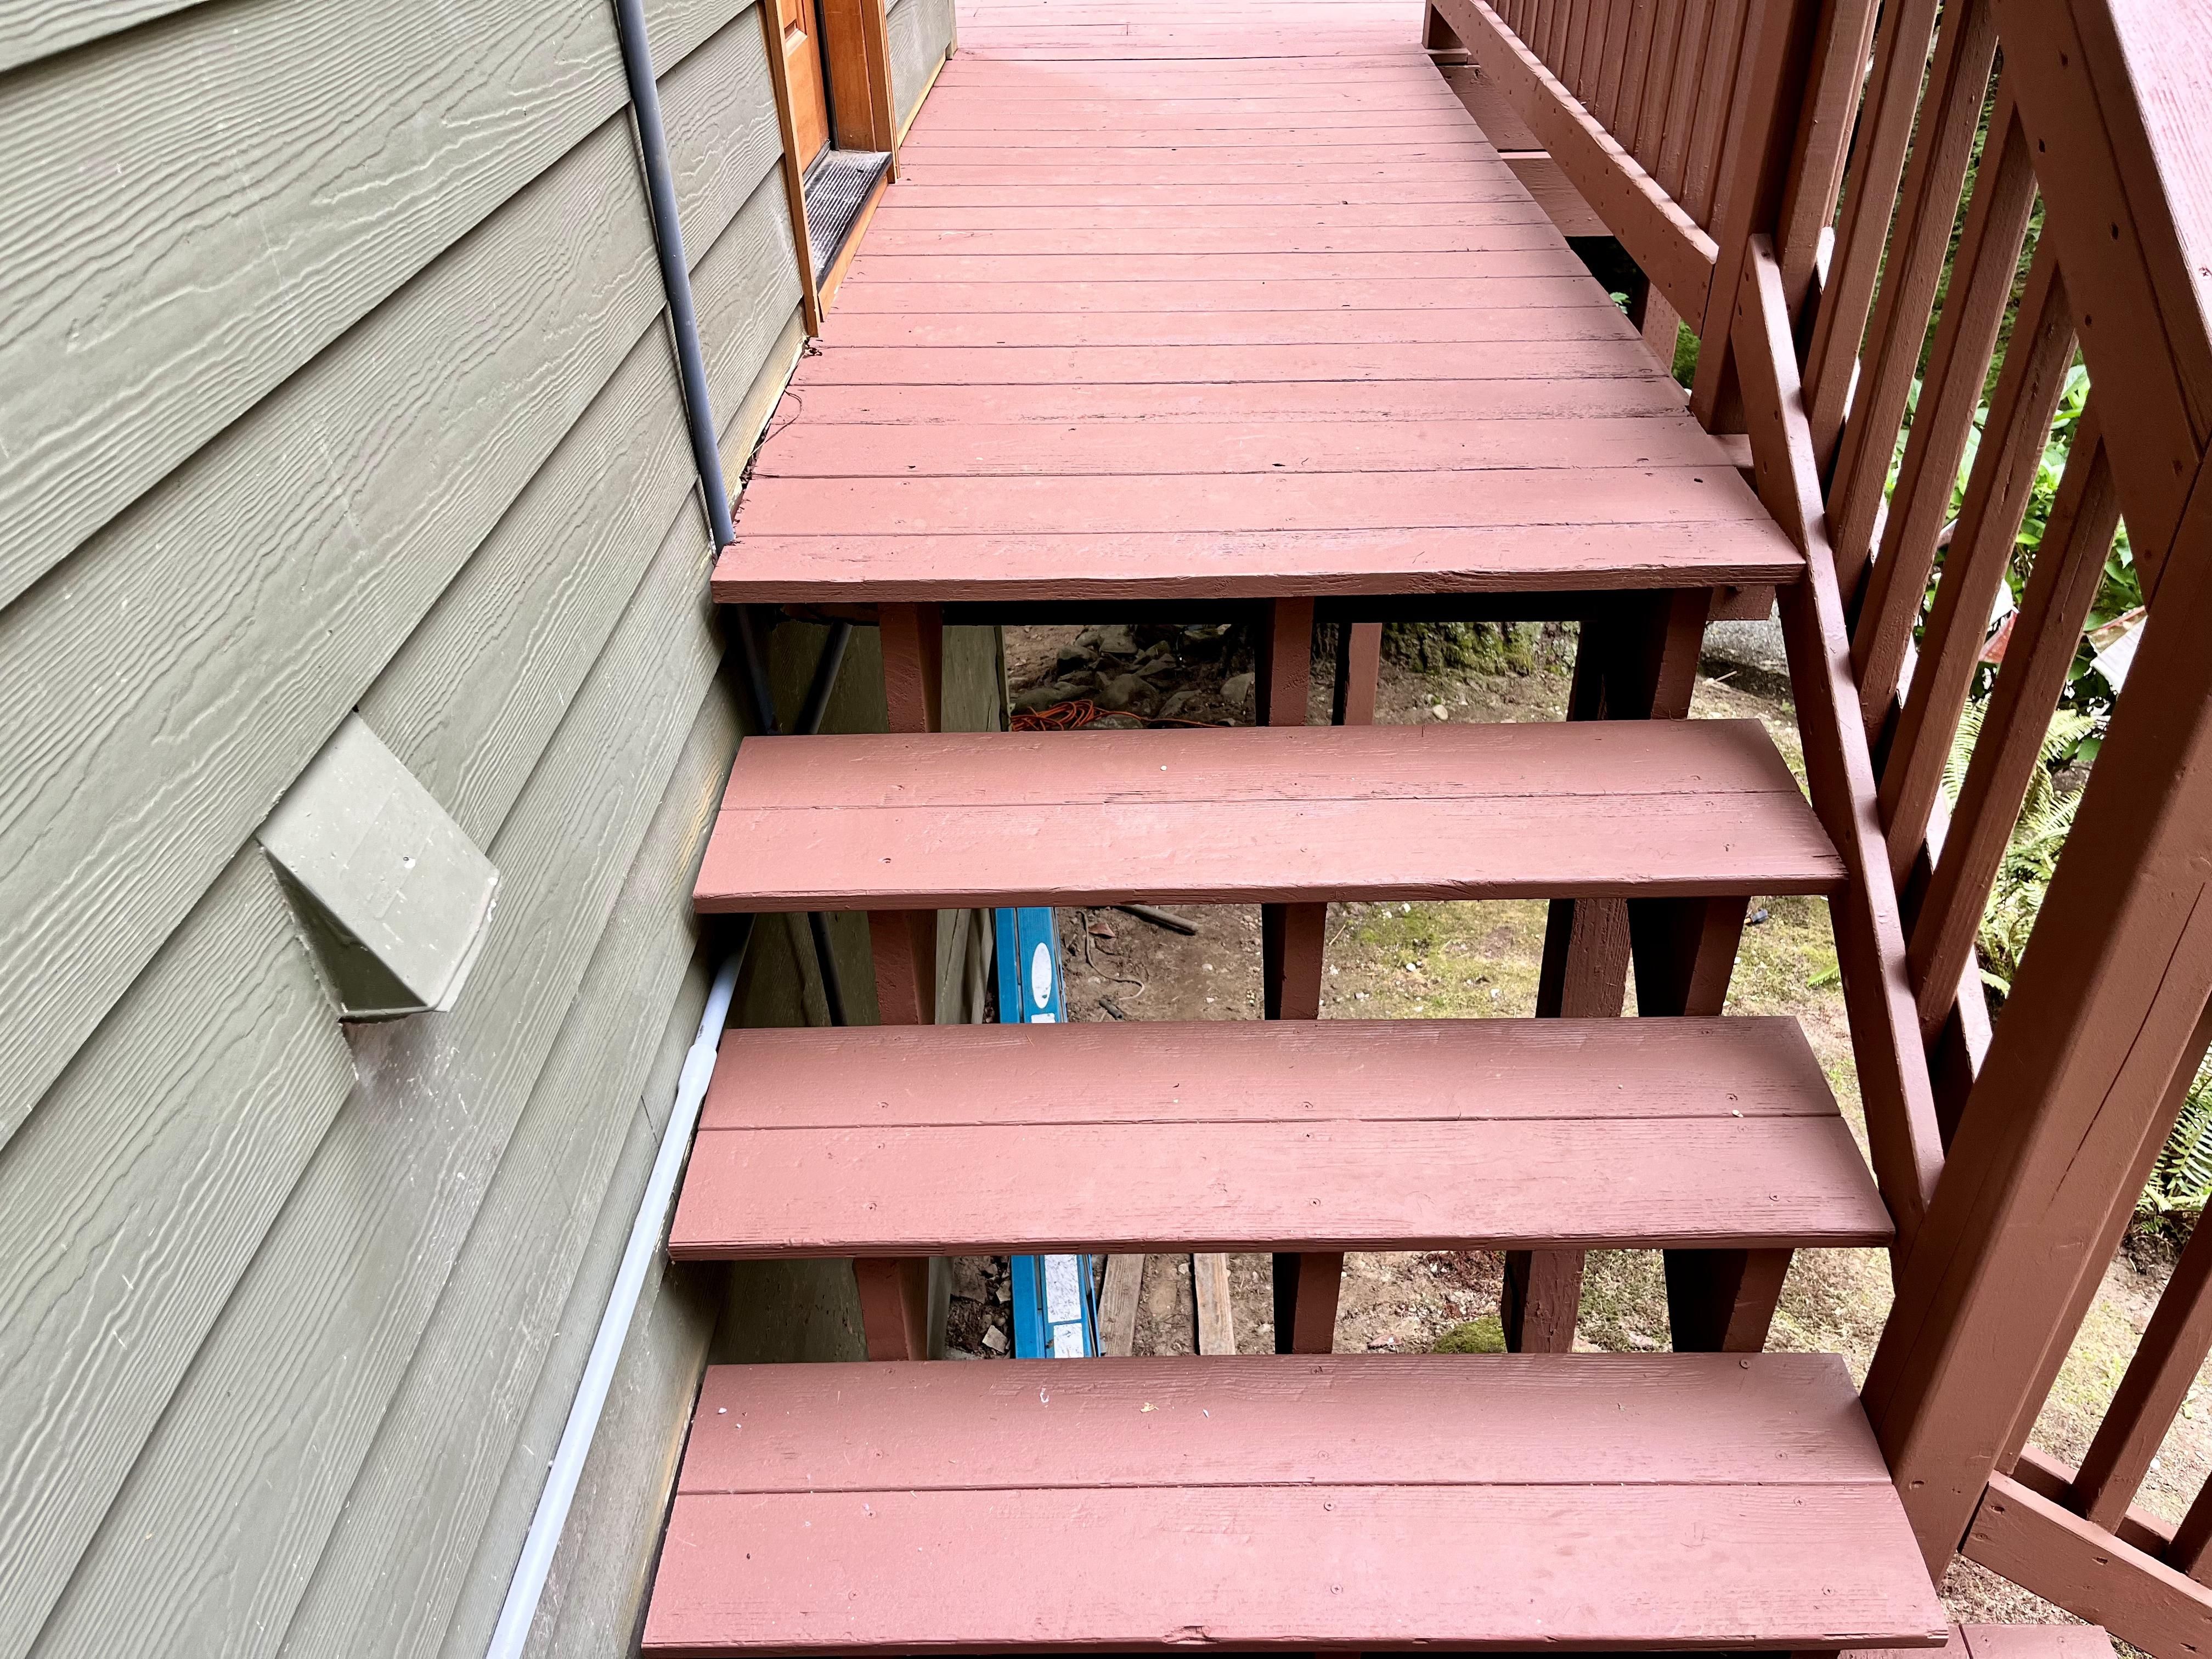 Deck Staining for Golden Line Painting, LLC in Seattle, WA